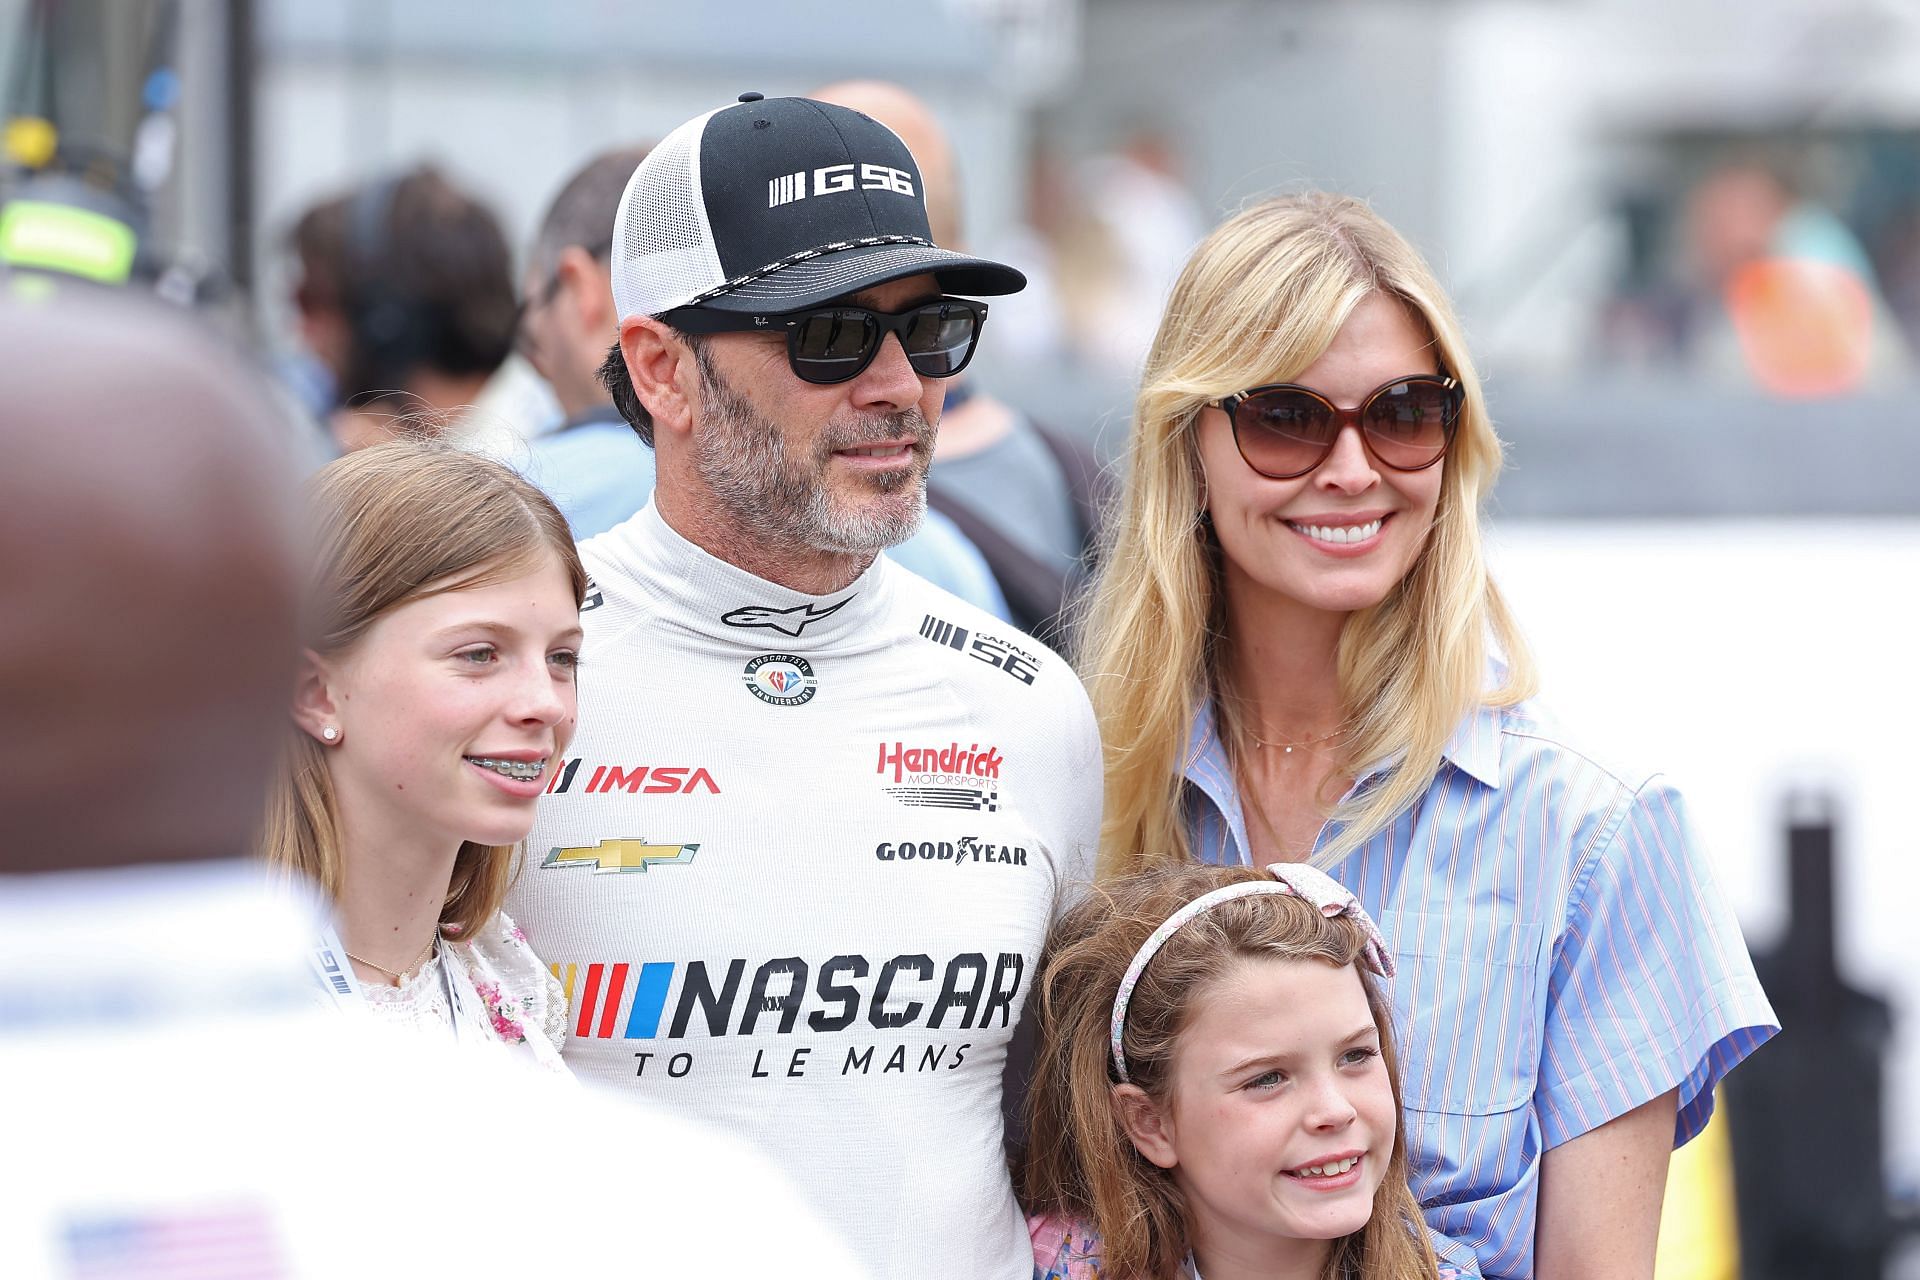 Jimmie Johnson (L) and wife Chandra Janway (R) with their two daughters. Picture Credits: The Sun.com/Getty Images